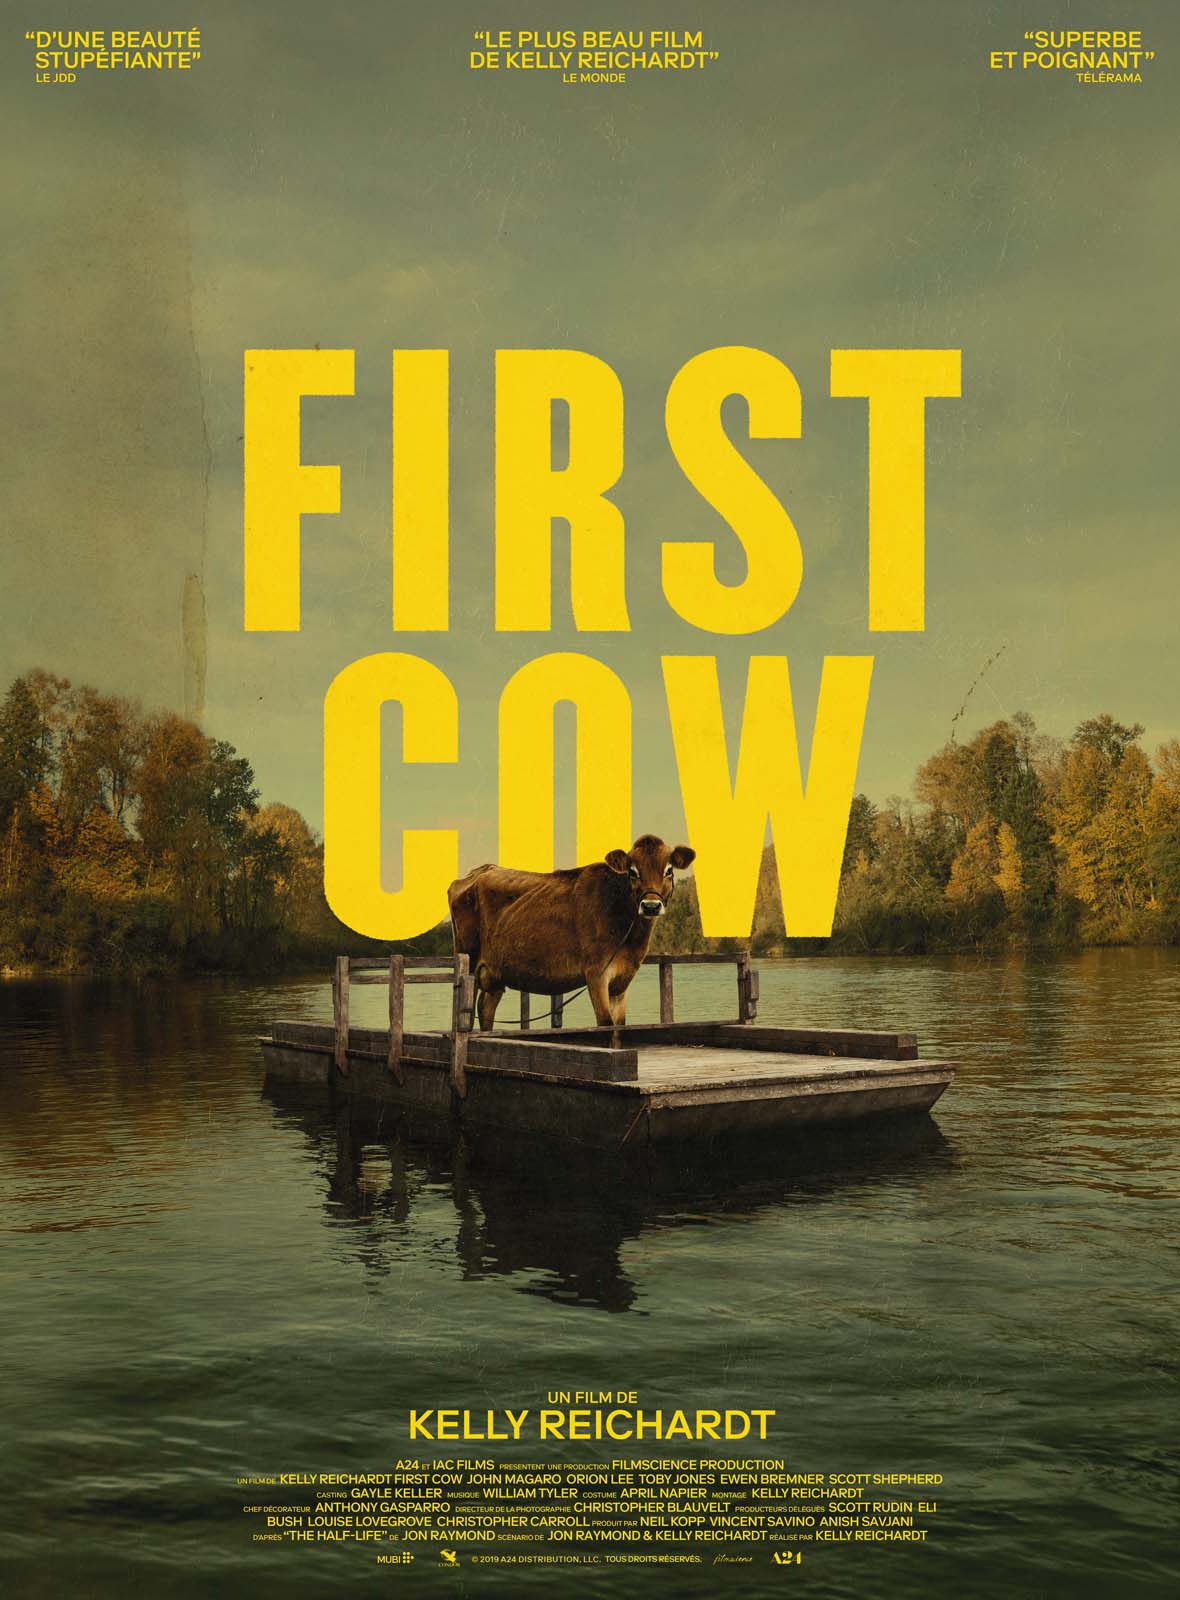 First Cow - Film (2019) streaming VF gratuit complet